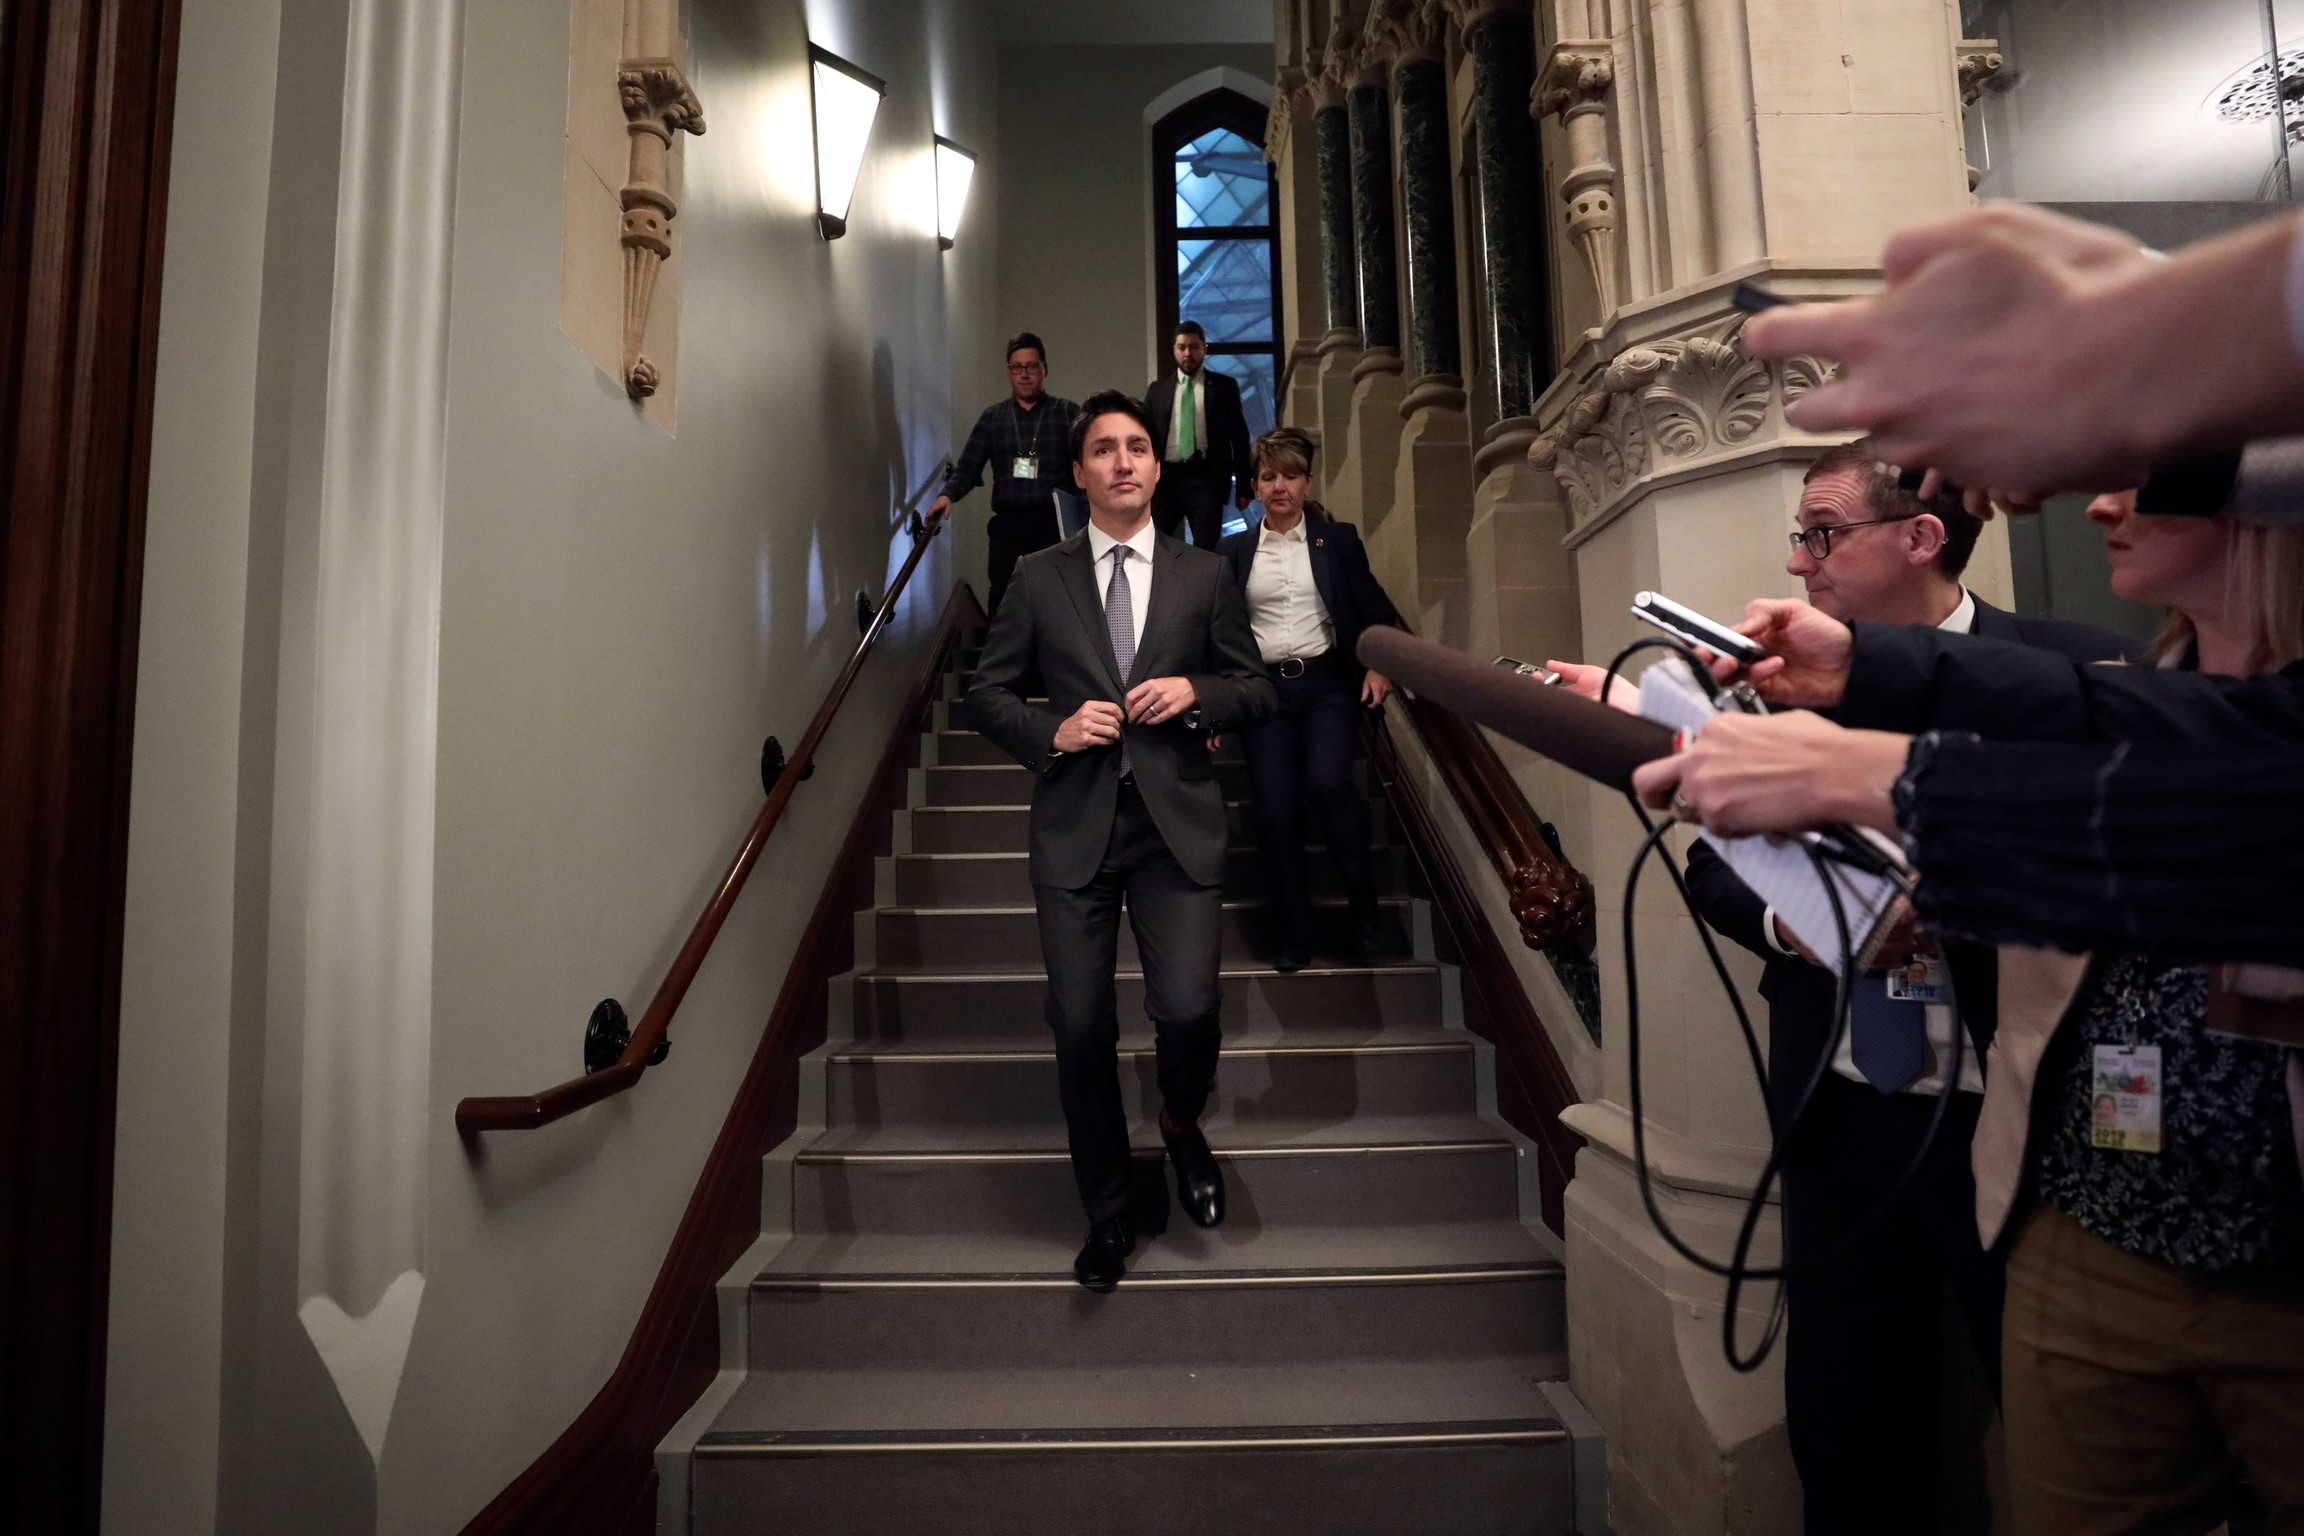 Canada's Prime Minister Justin Trudeau arrives for a Liberal Party caucus meeting on Parliament Hill in Ottawa, Ontario, Canada, April 2, 2019. REUTERS/Chris Wattie 